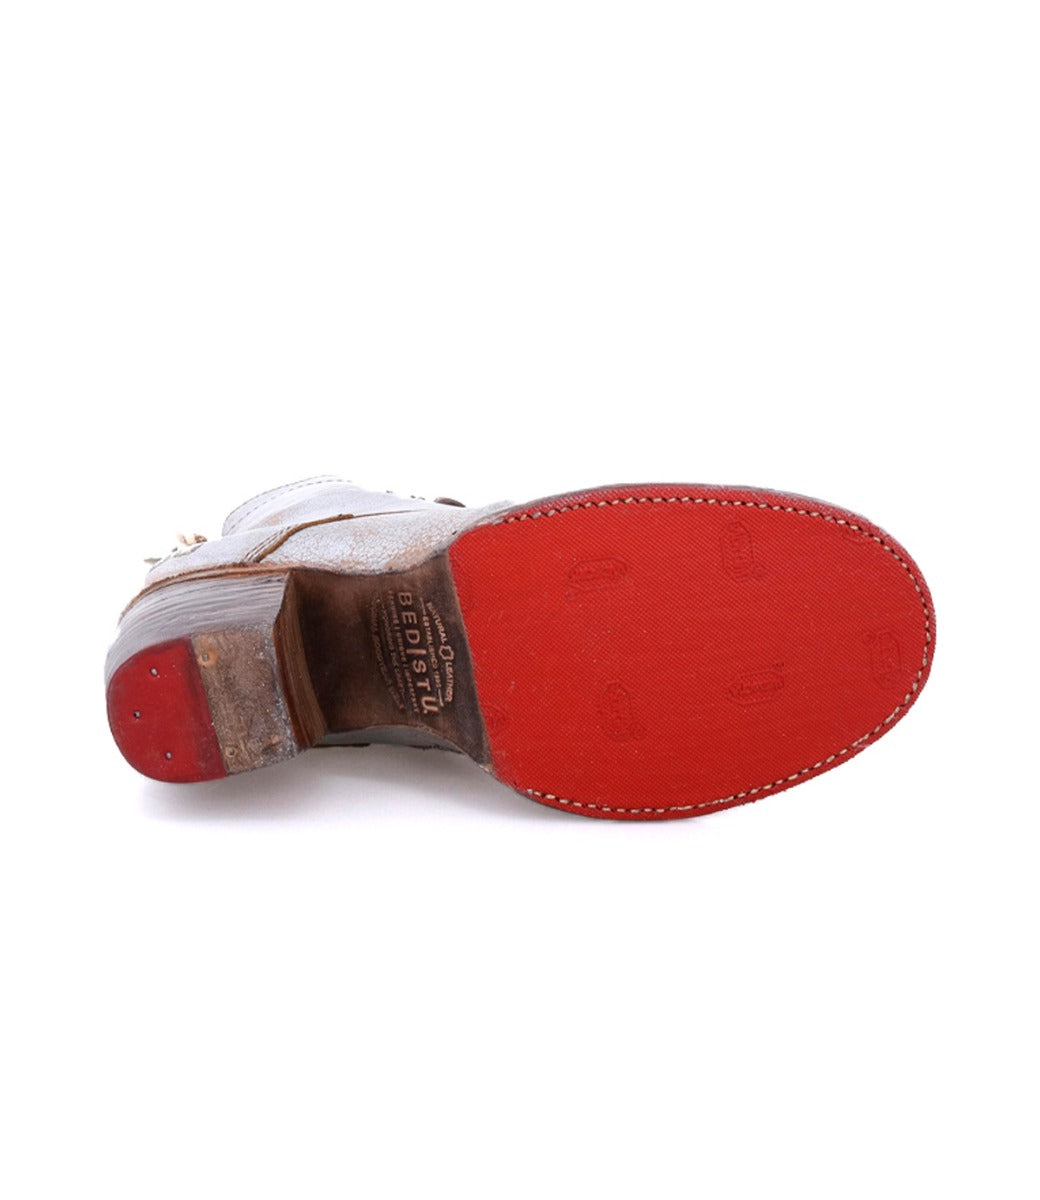 A pair of Bed Stu shoes with red soles on a white background.